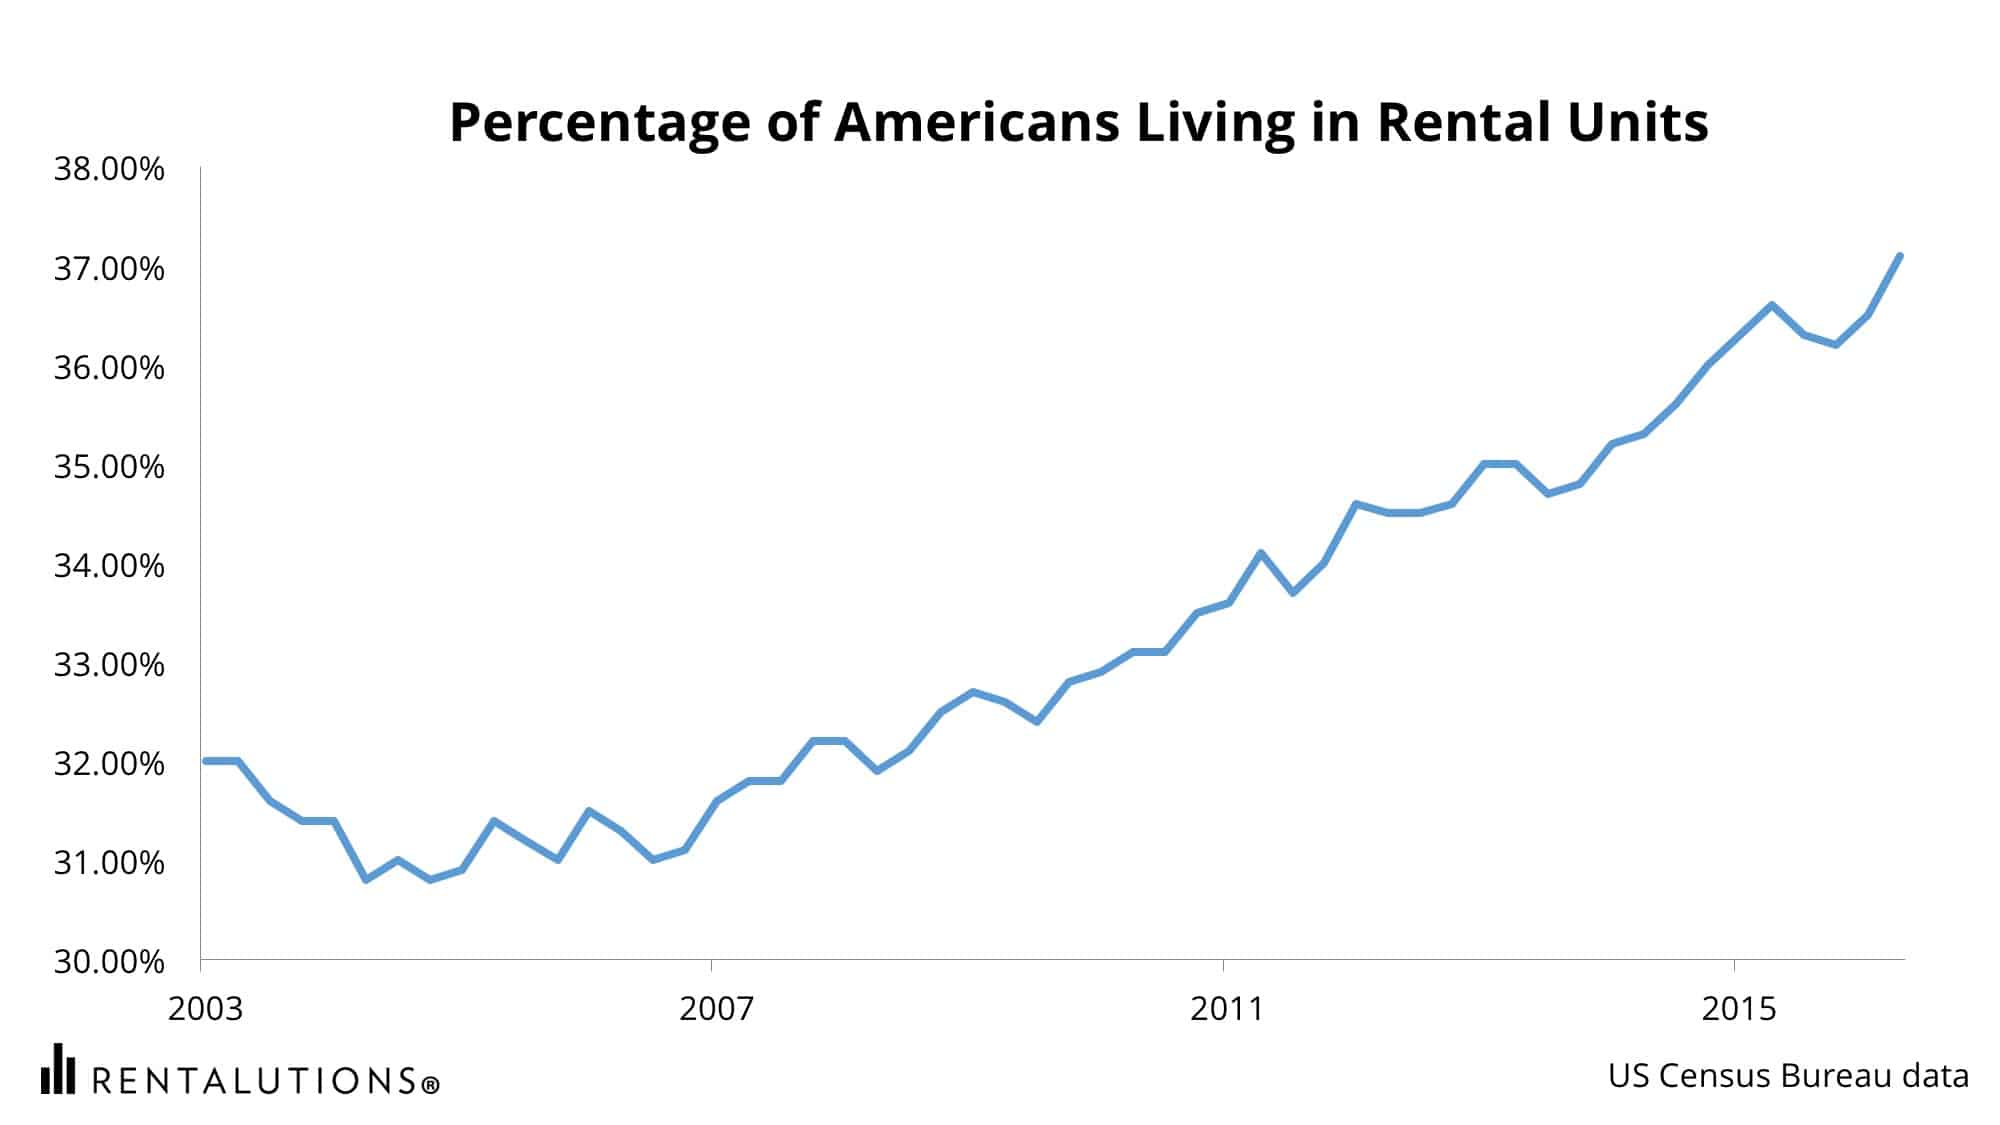 Percentage of Americans Living in Rentals